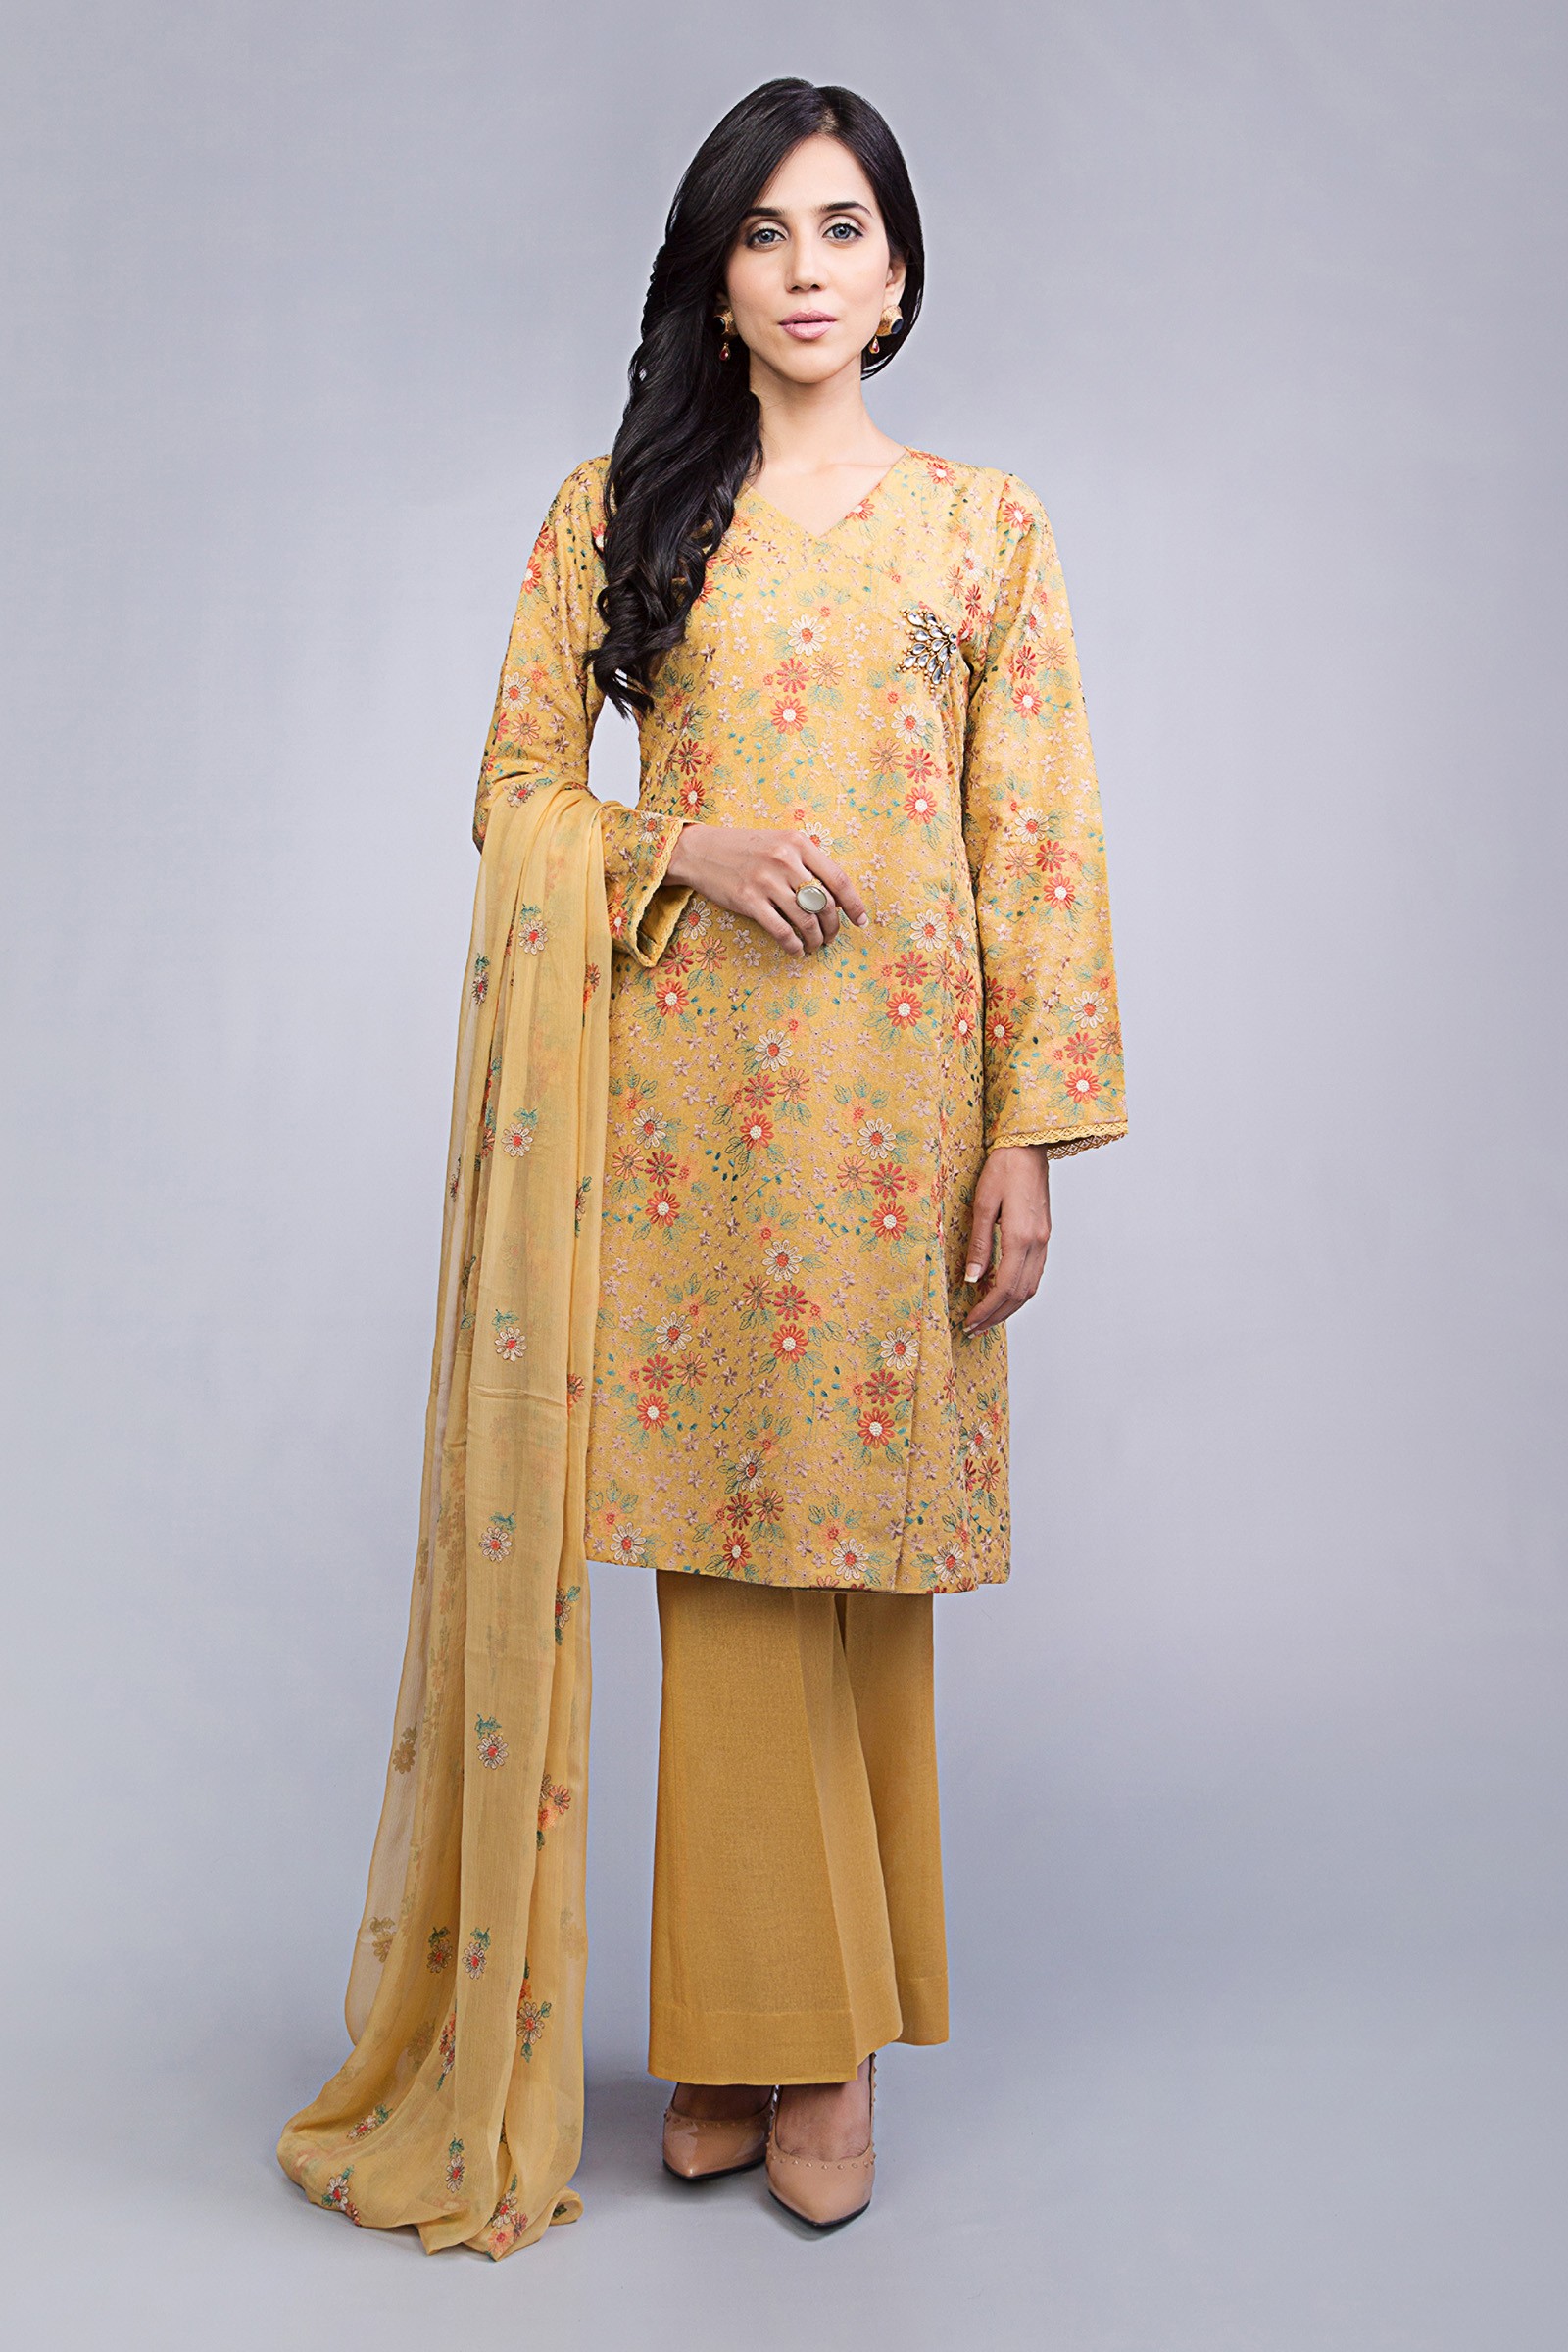 Yellow floral embroidered pret wear 3 piece dress by Bareeze online 2019